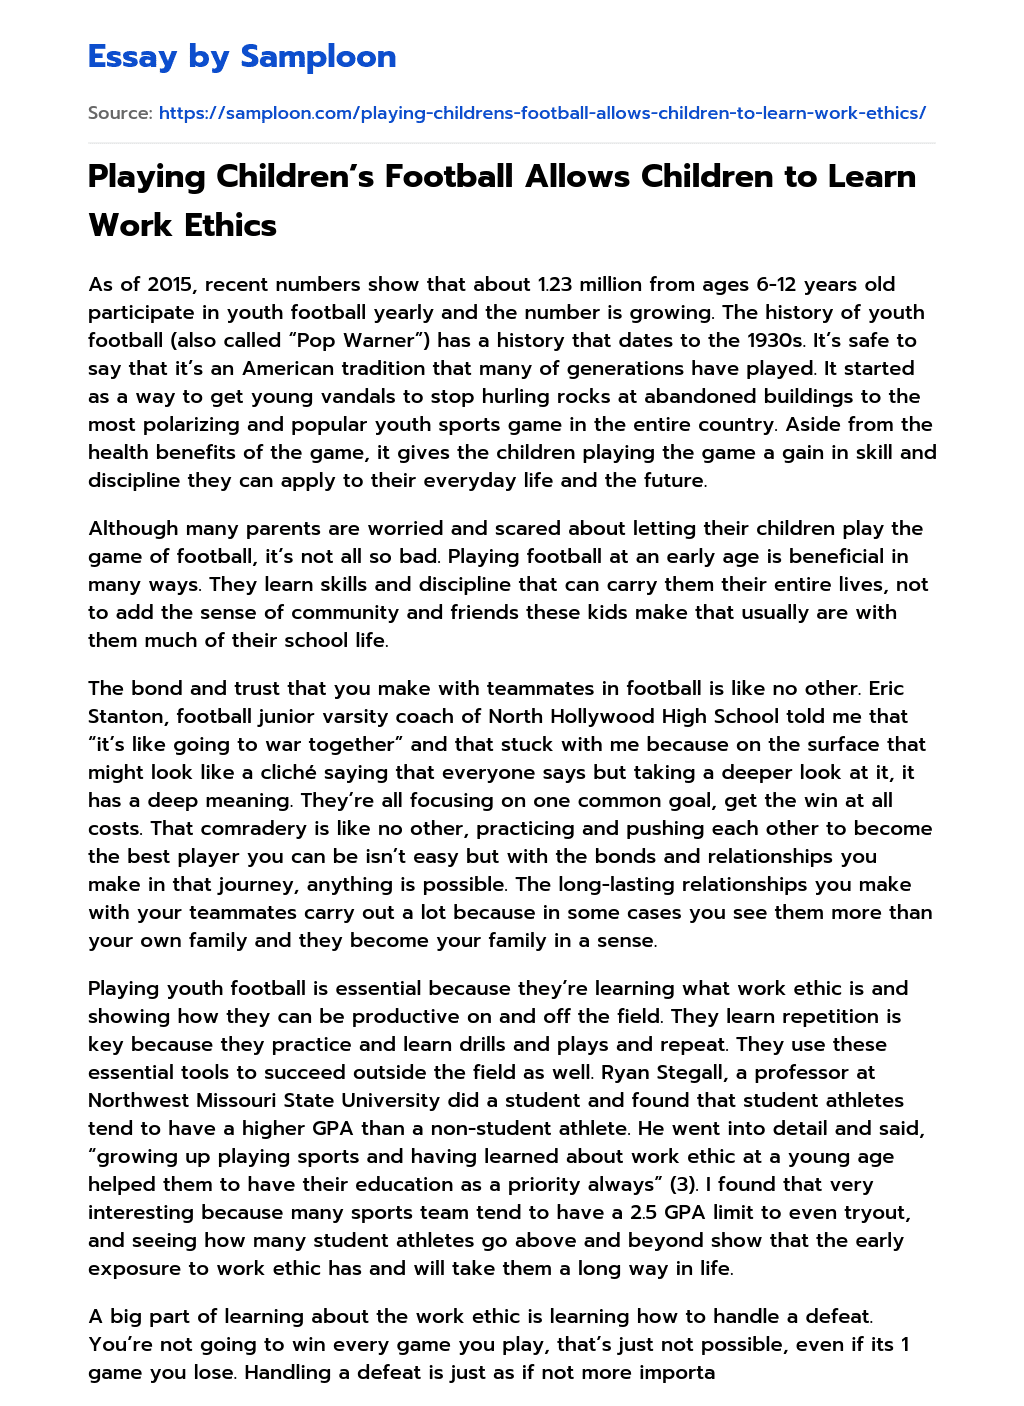 Playing Children’s Football Allows Children to Learn Work Ethics essay